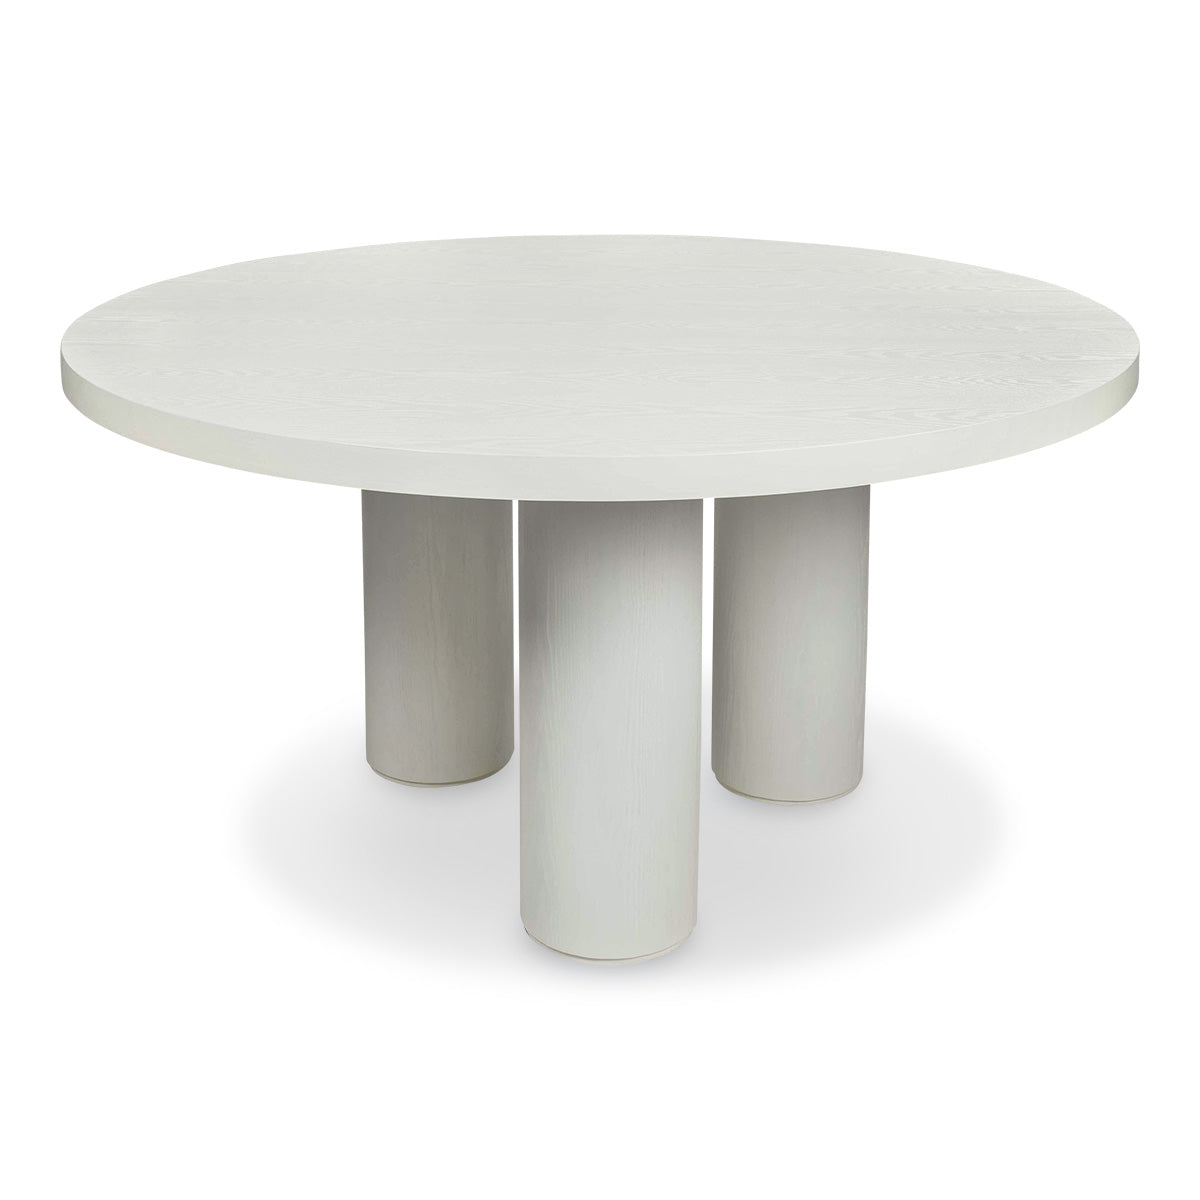 Oia Round Dining Table in White Washed Oak